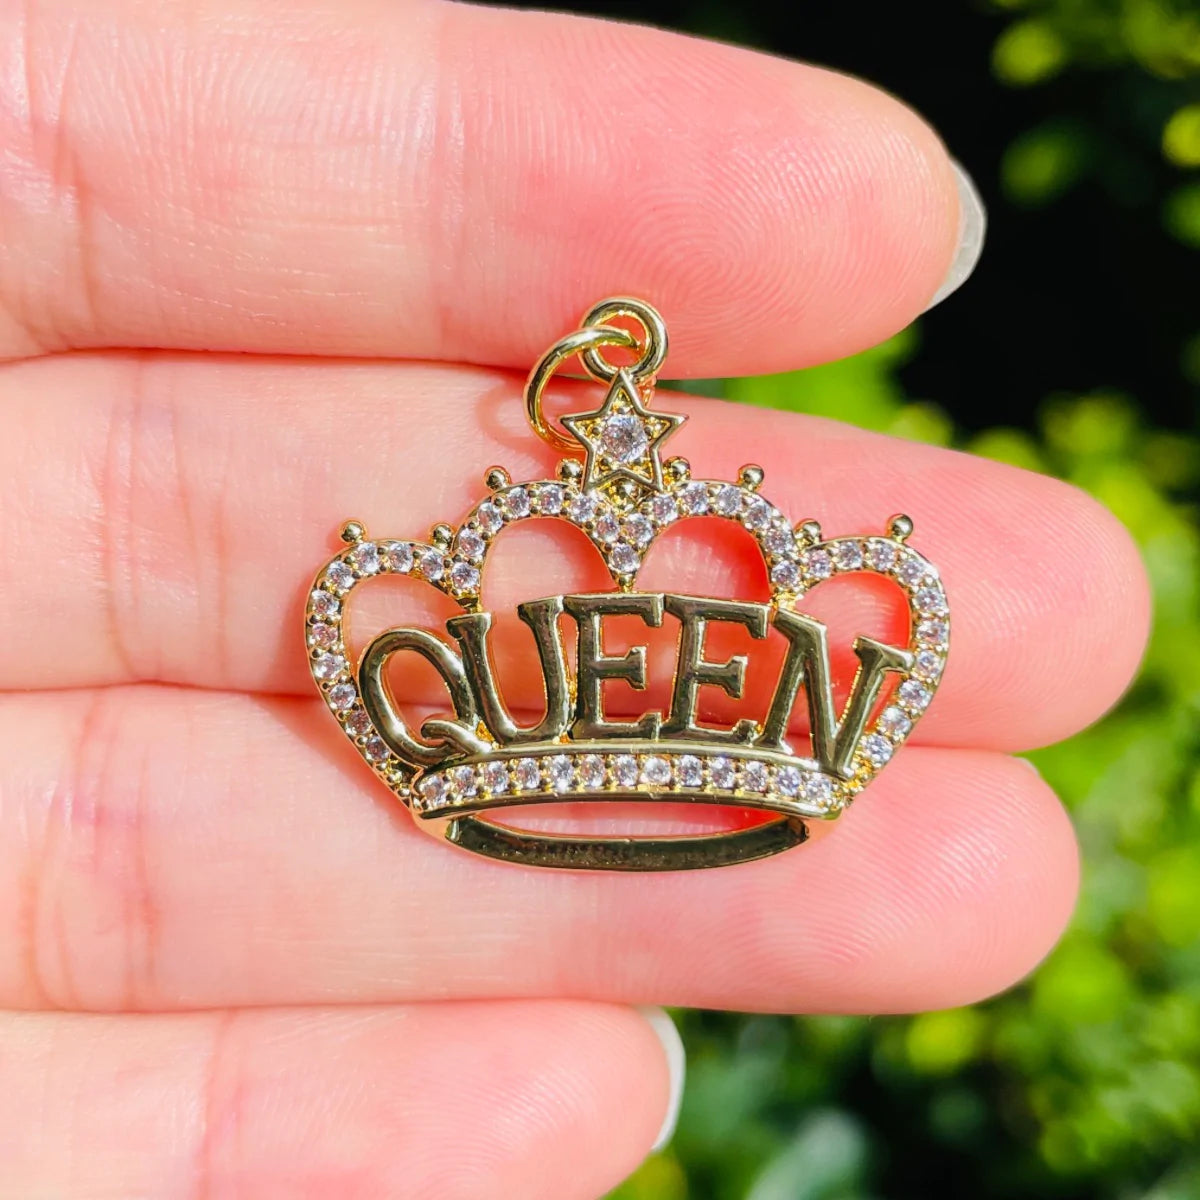 10pcs/lot 28*25mm CZ Paved Crown Queen Word Charms Gold CZ Paved Charms Crowns New Charms Arrivals Queen Charms Charms Beads Beyond